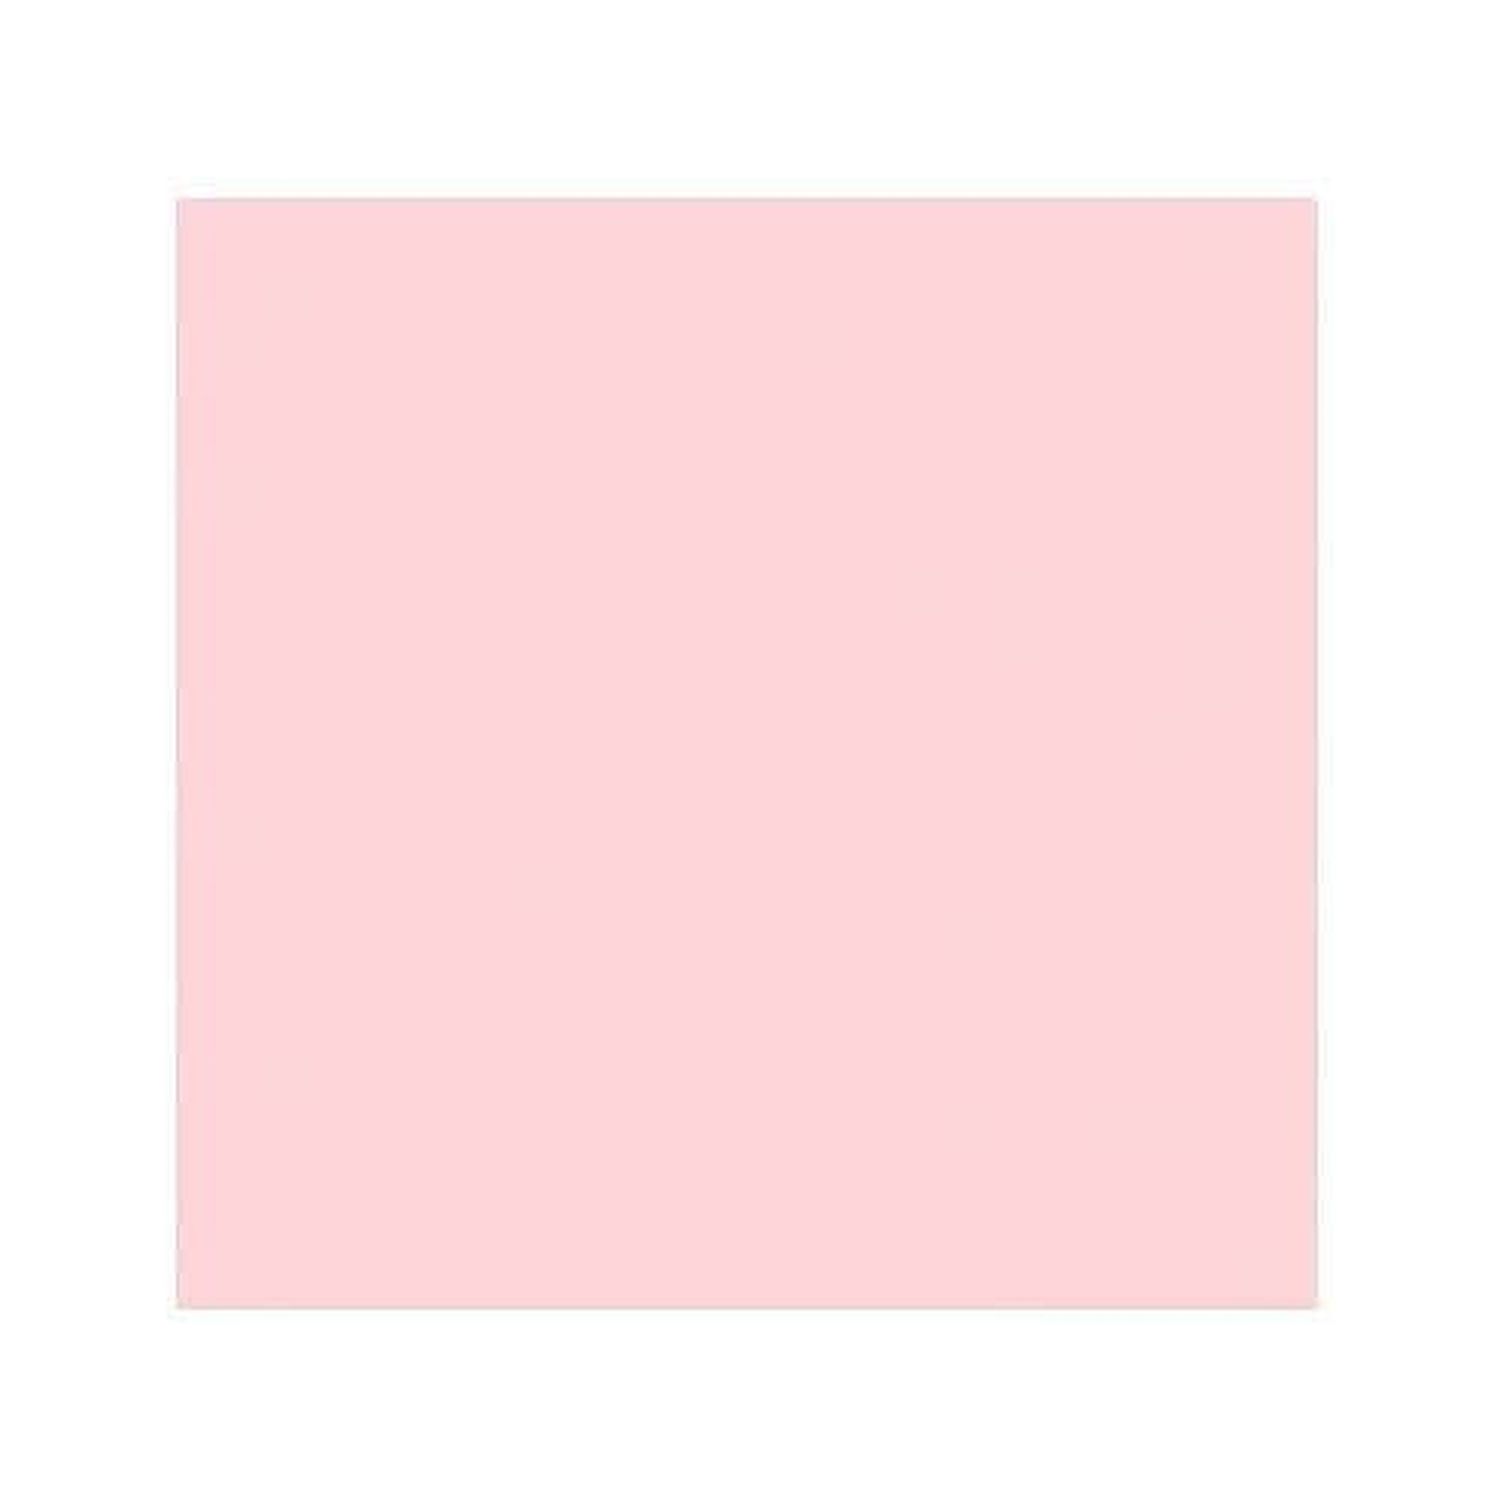 Lux 12 x 12 Cardstock 250/Box, Candy Pink (1212-C-14-250)